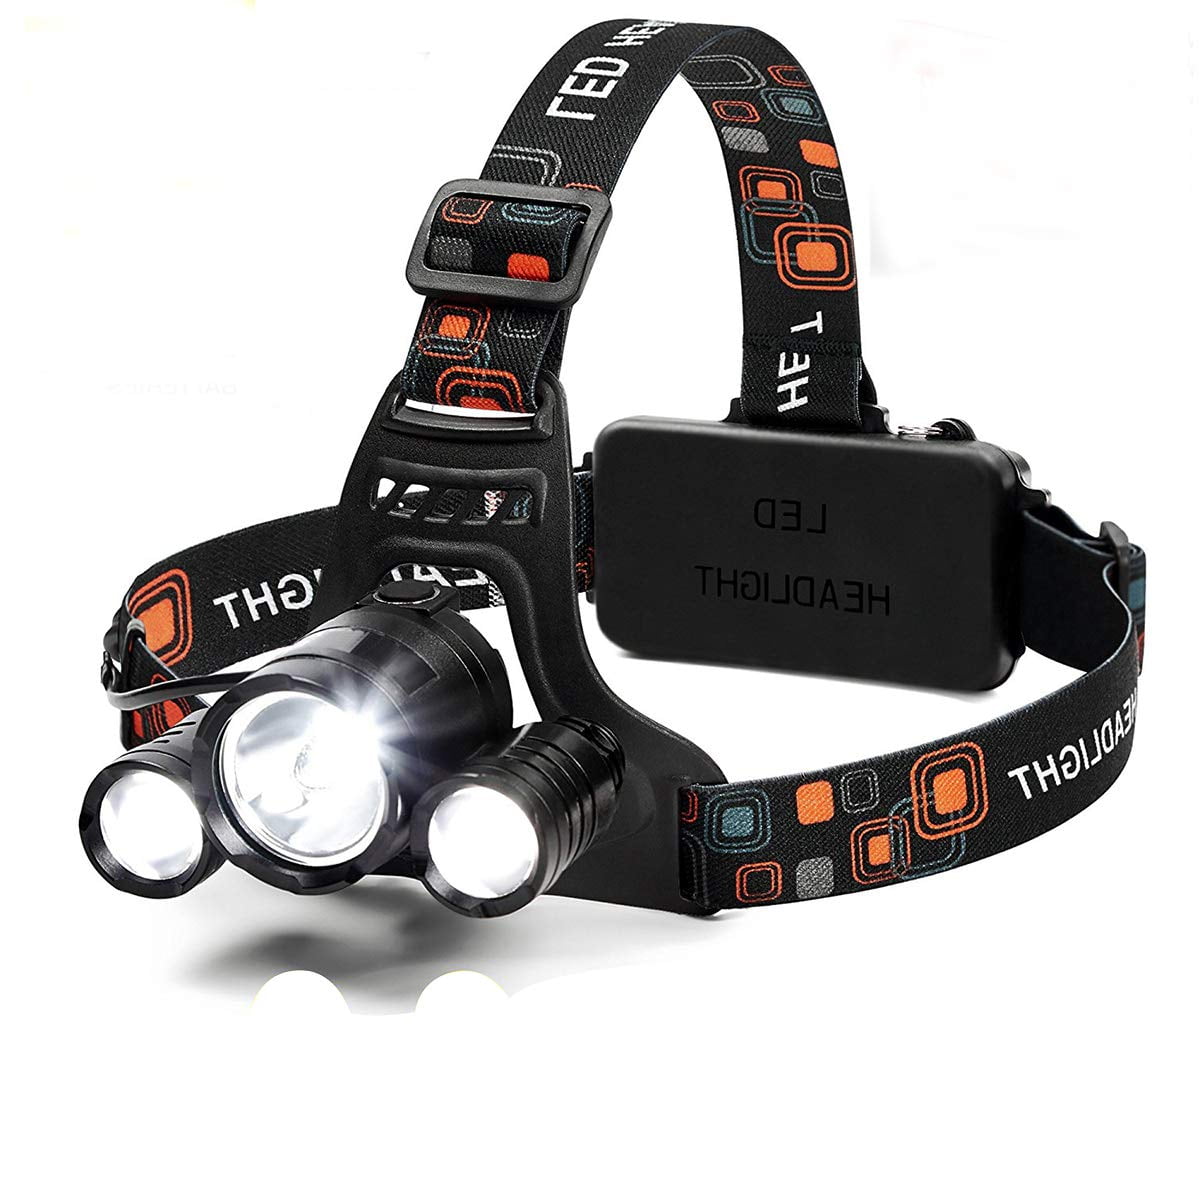 6000 Lumen Super Victoper Wesho Rechargeable Headlight with 3 Lights 4 Modes 